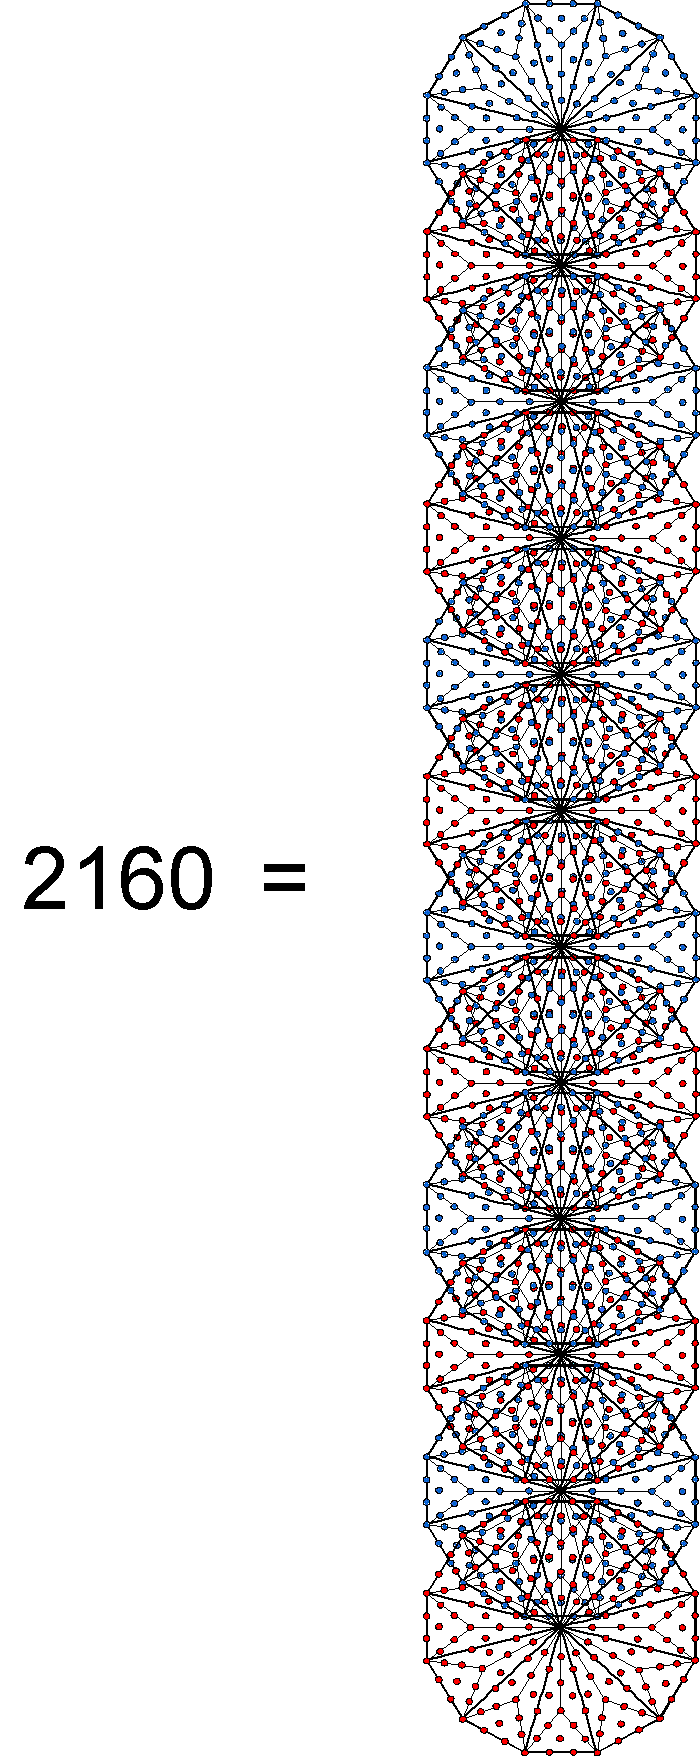 2160 yods surround centres of 12 Type B dodecagons